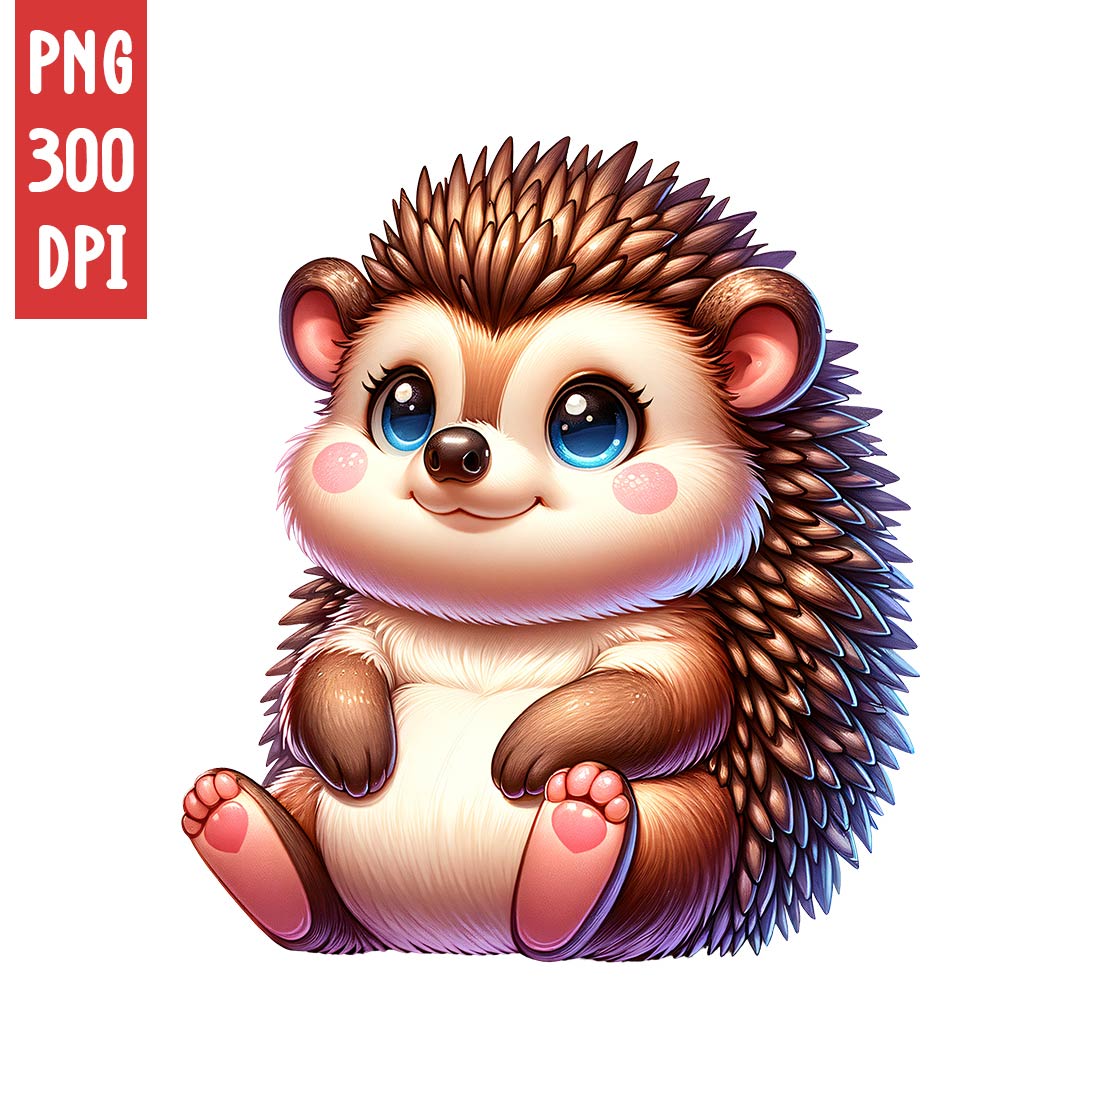 Cute Hedgehog Clipart | Animals Clipart | PNG cover image.